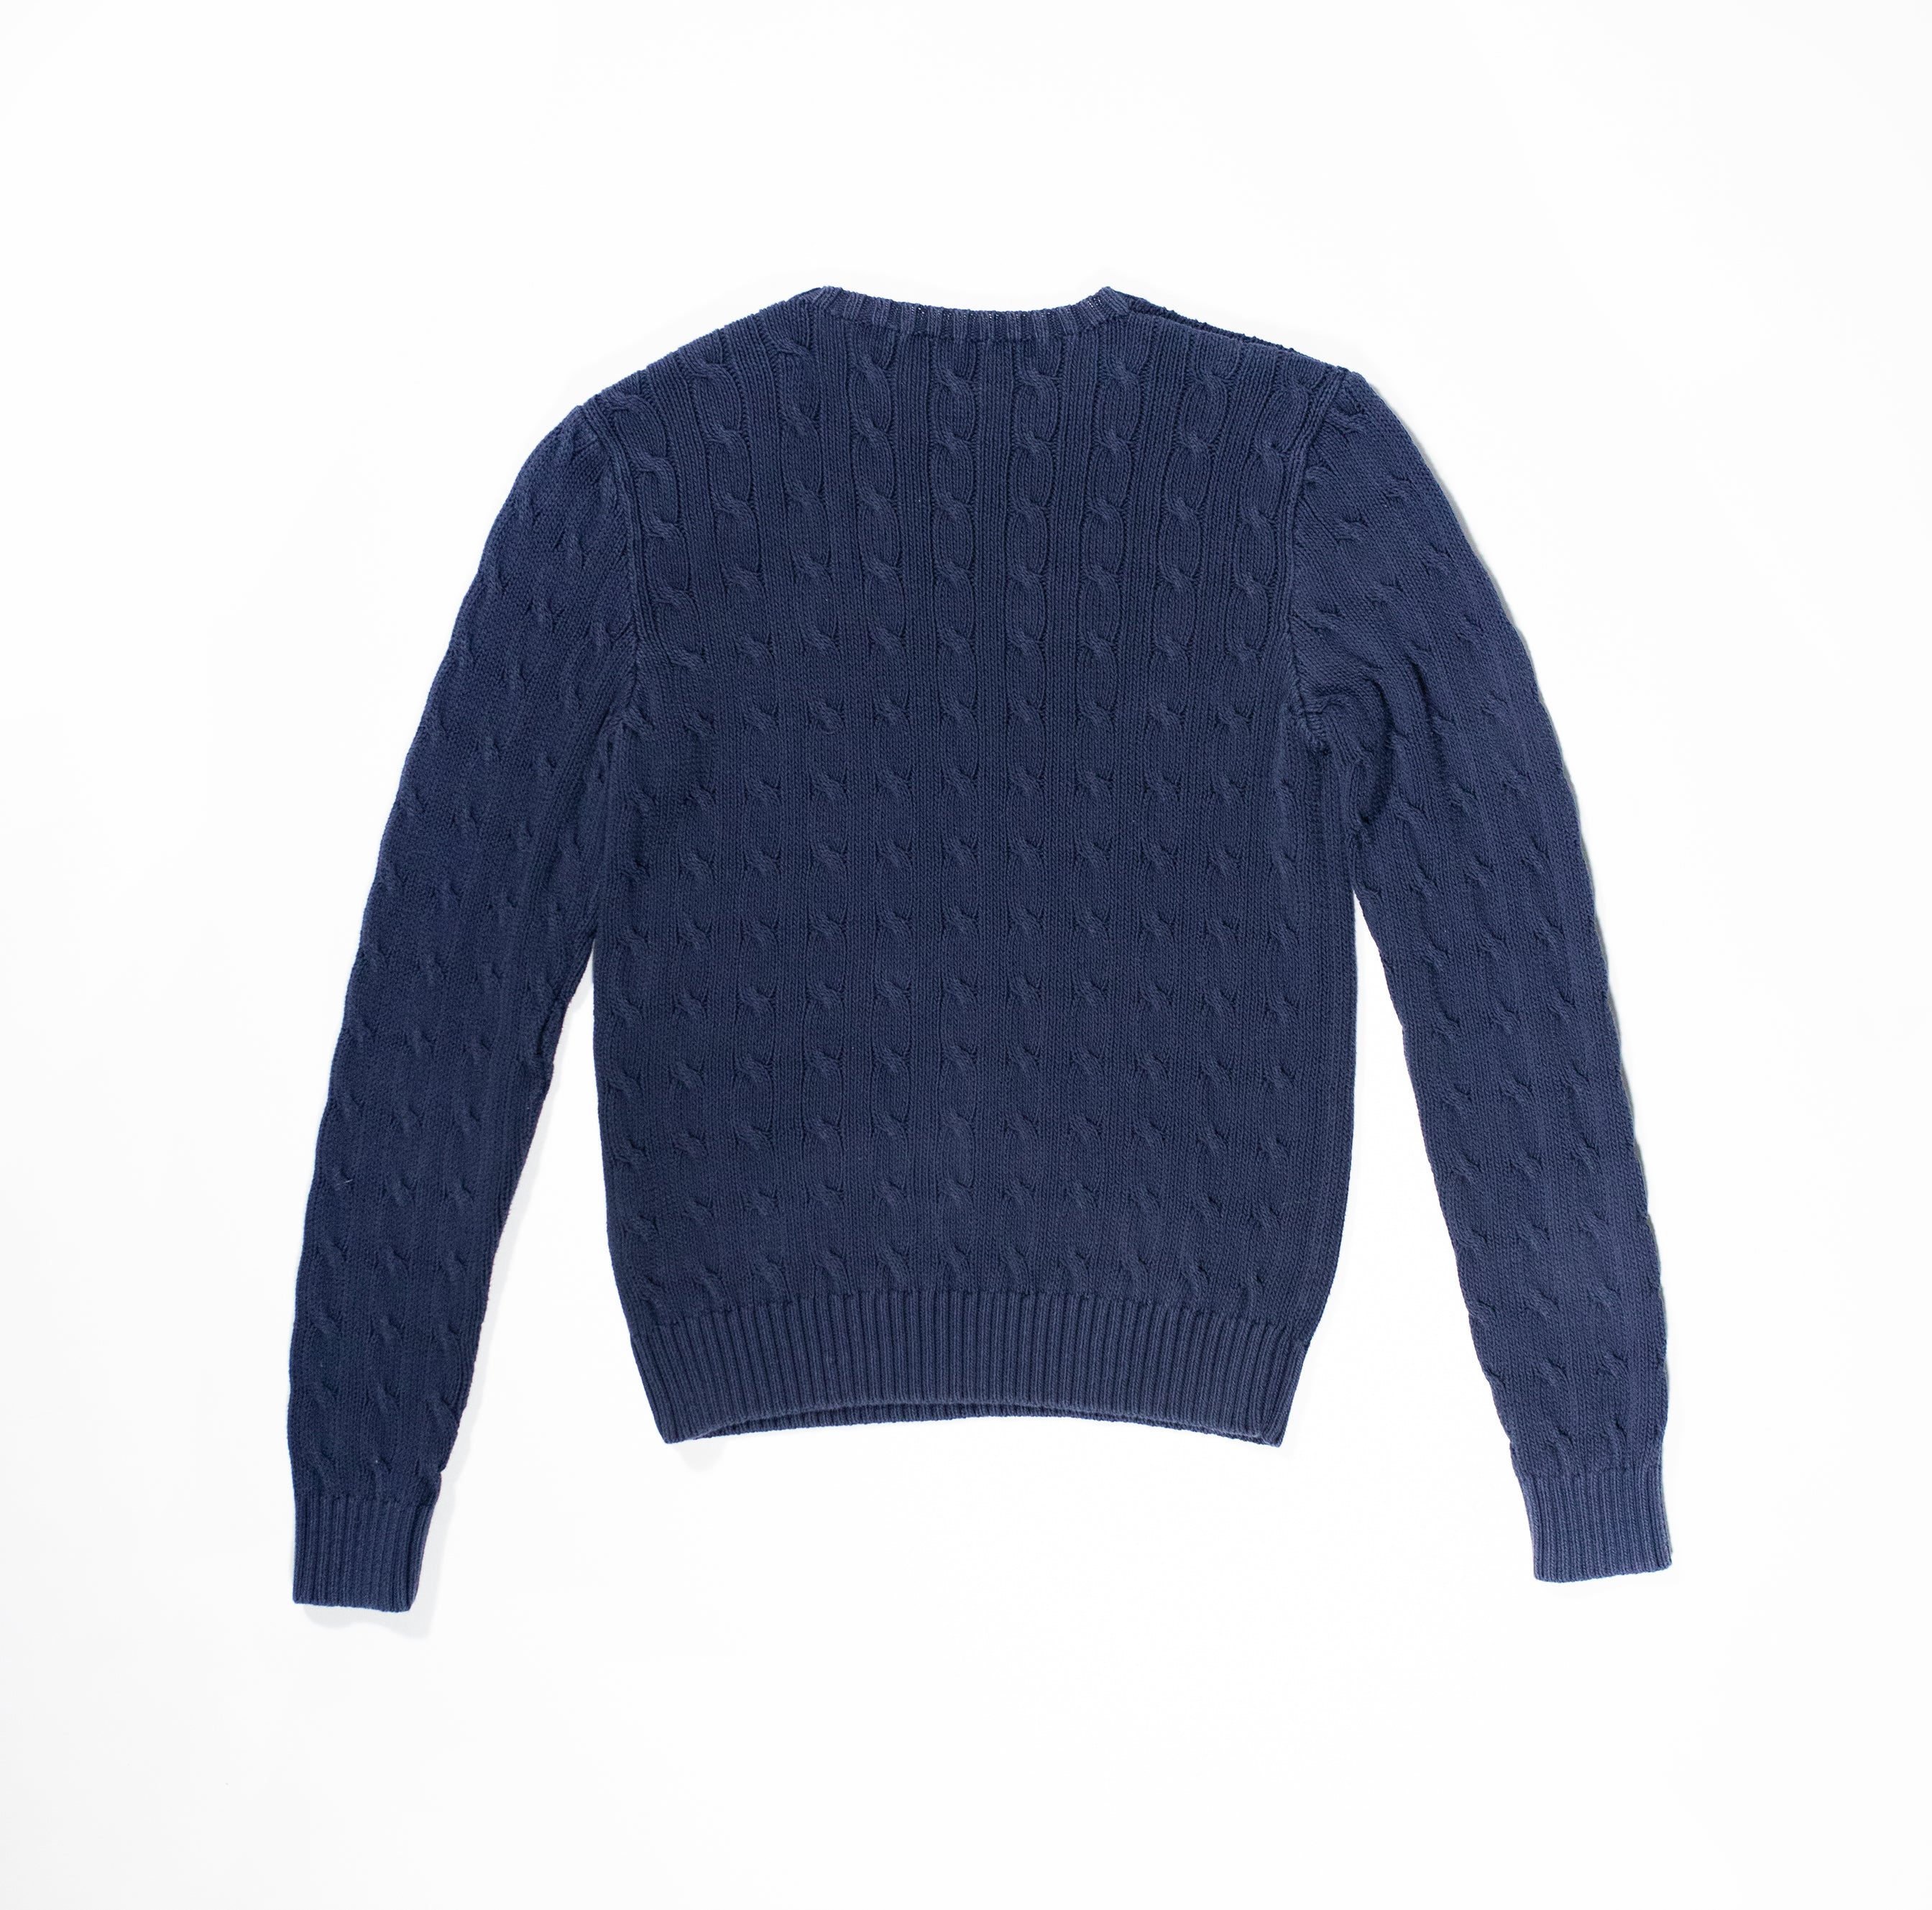 Navy Cable Knit Sweater